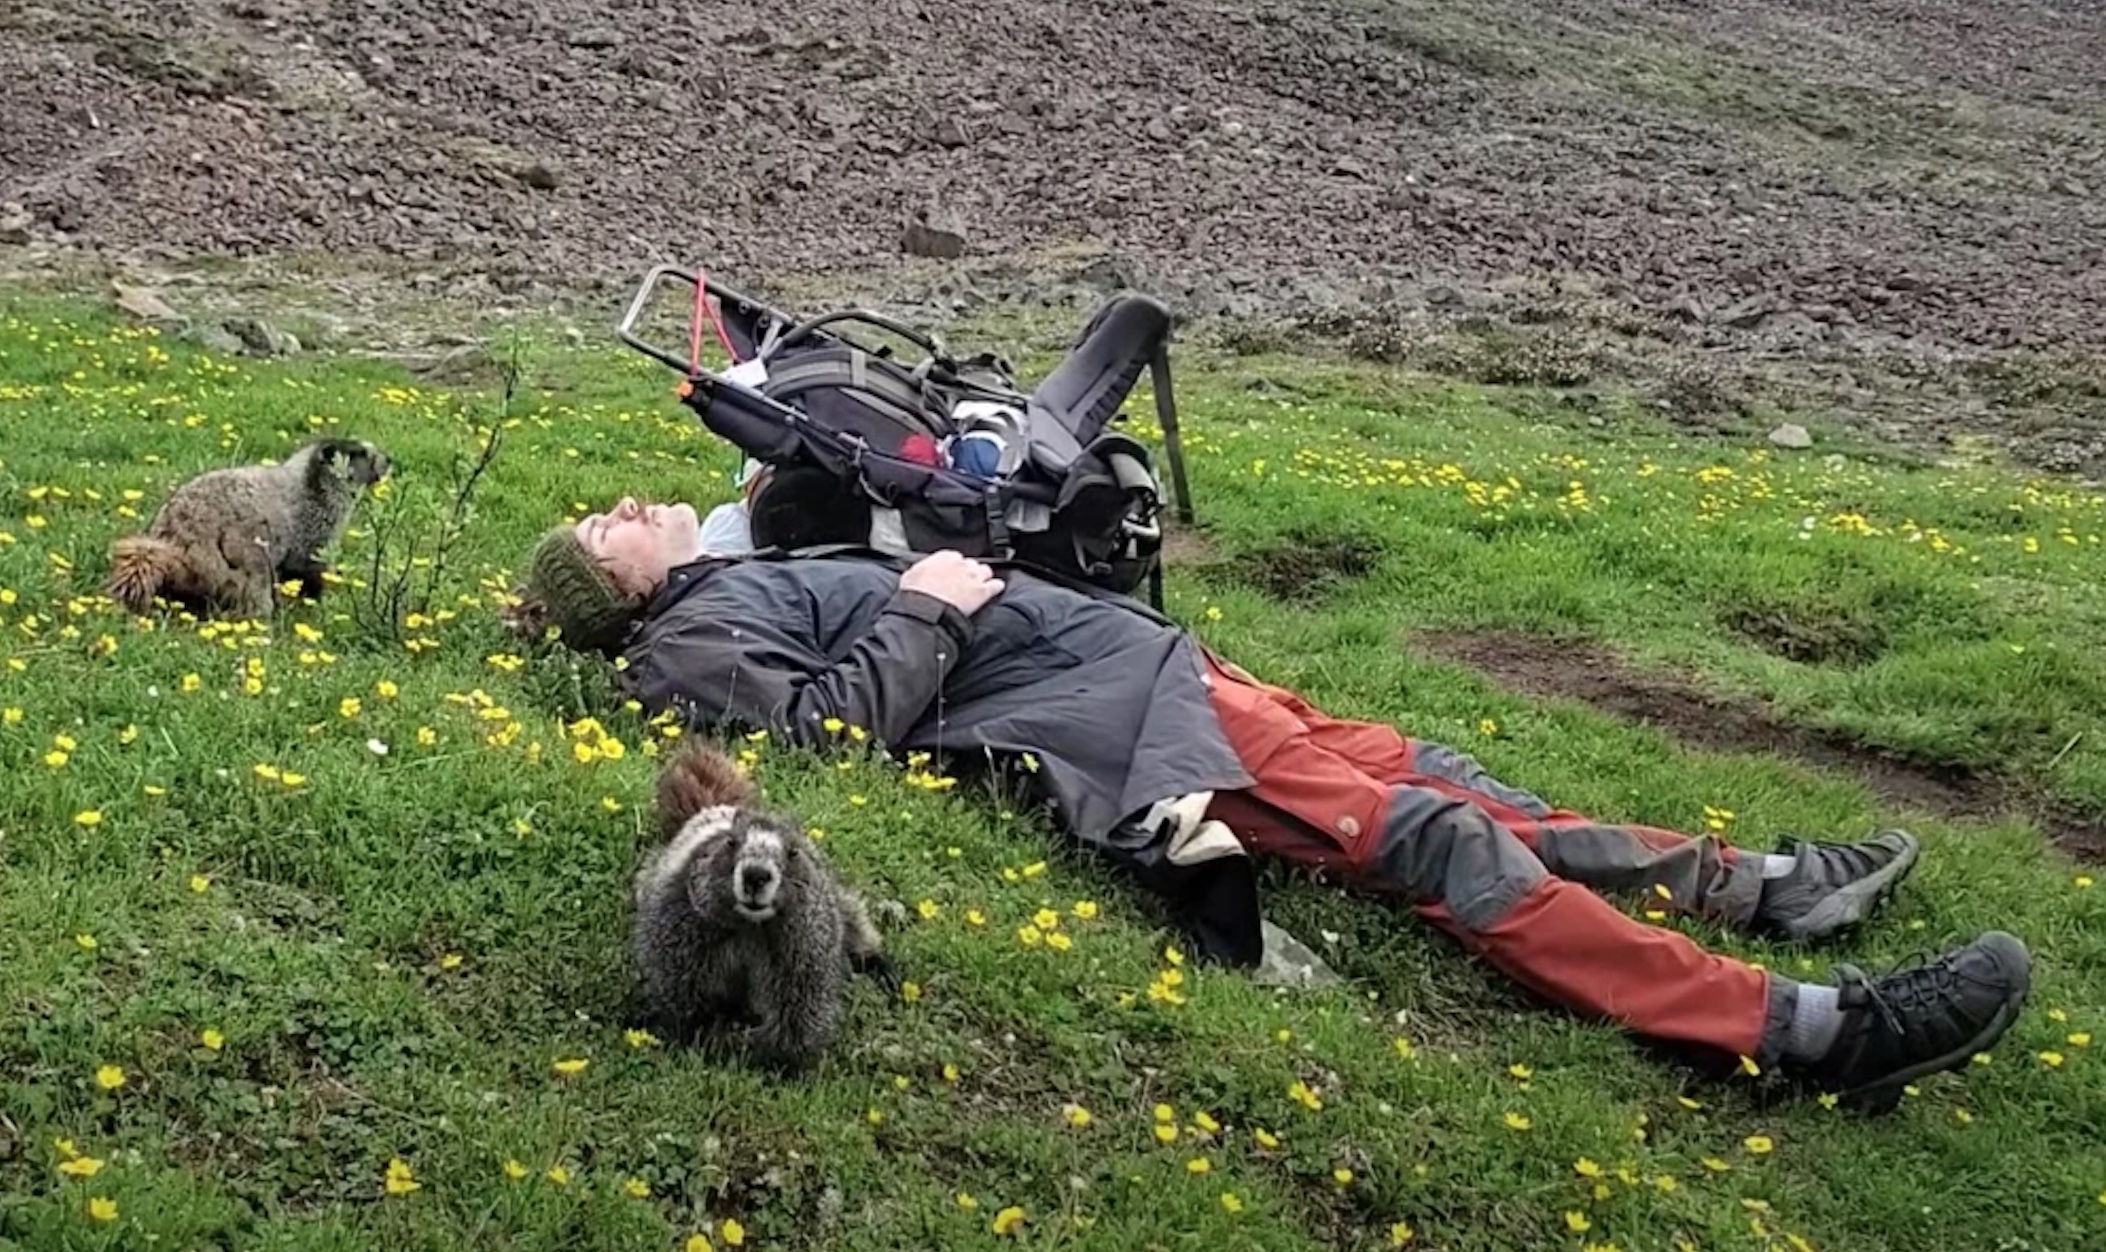 VIDEO: Marmots Use Exhausted Hiker As Salt Lick